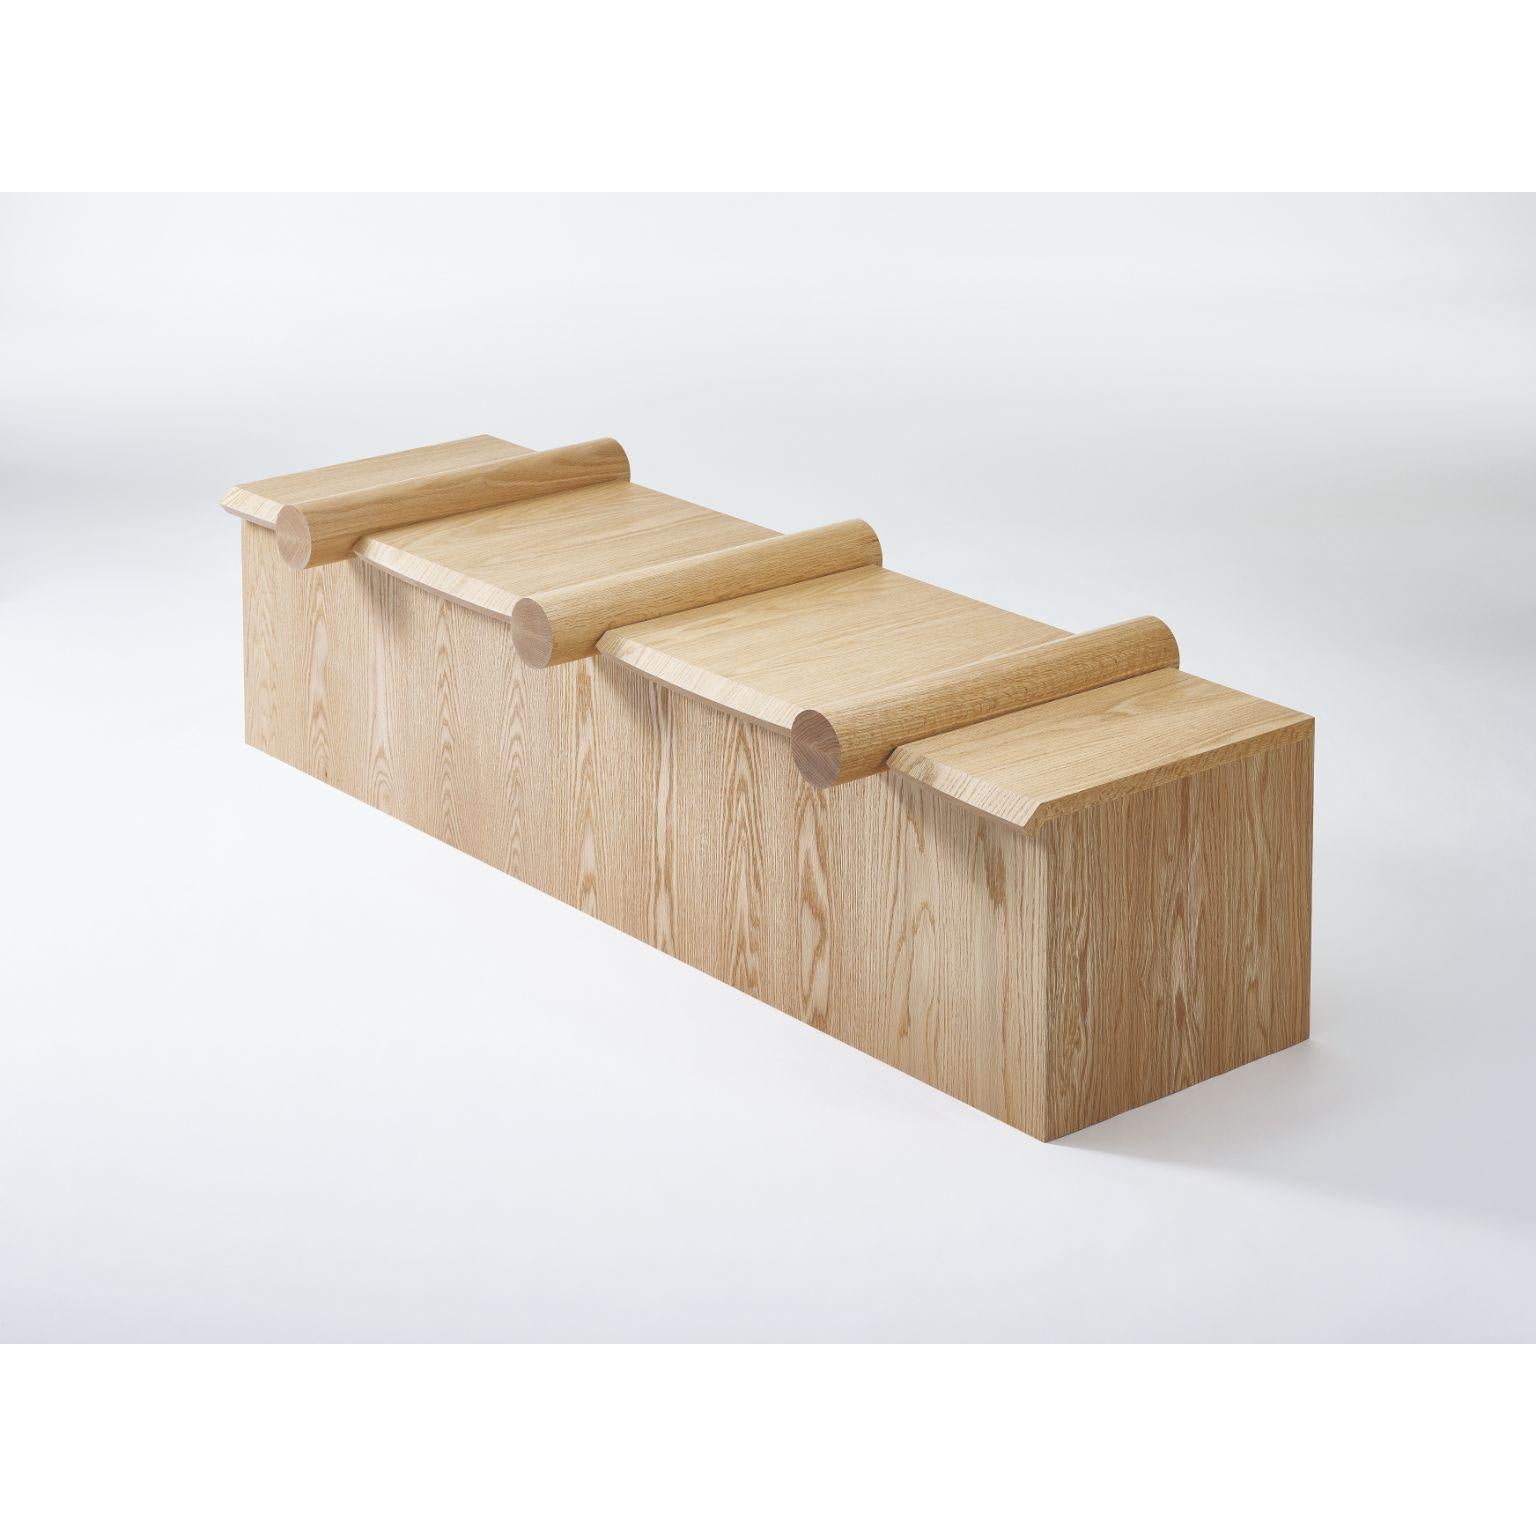 Heritage Giwa sideboard by Lee Jung Hoon
Dimensions: D 163.2 x W 53 x H 41.1 cm
Materials: Red oak

The Heritage series, created by designer Lee Jung-hoon is a collection of sculptural modern furniture. The designs are inspired by the